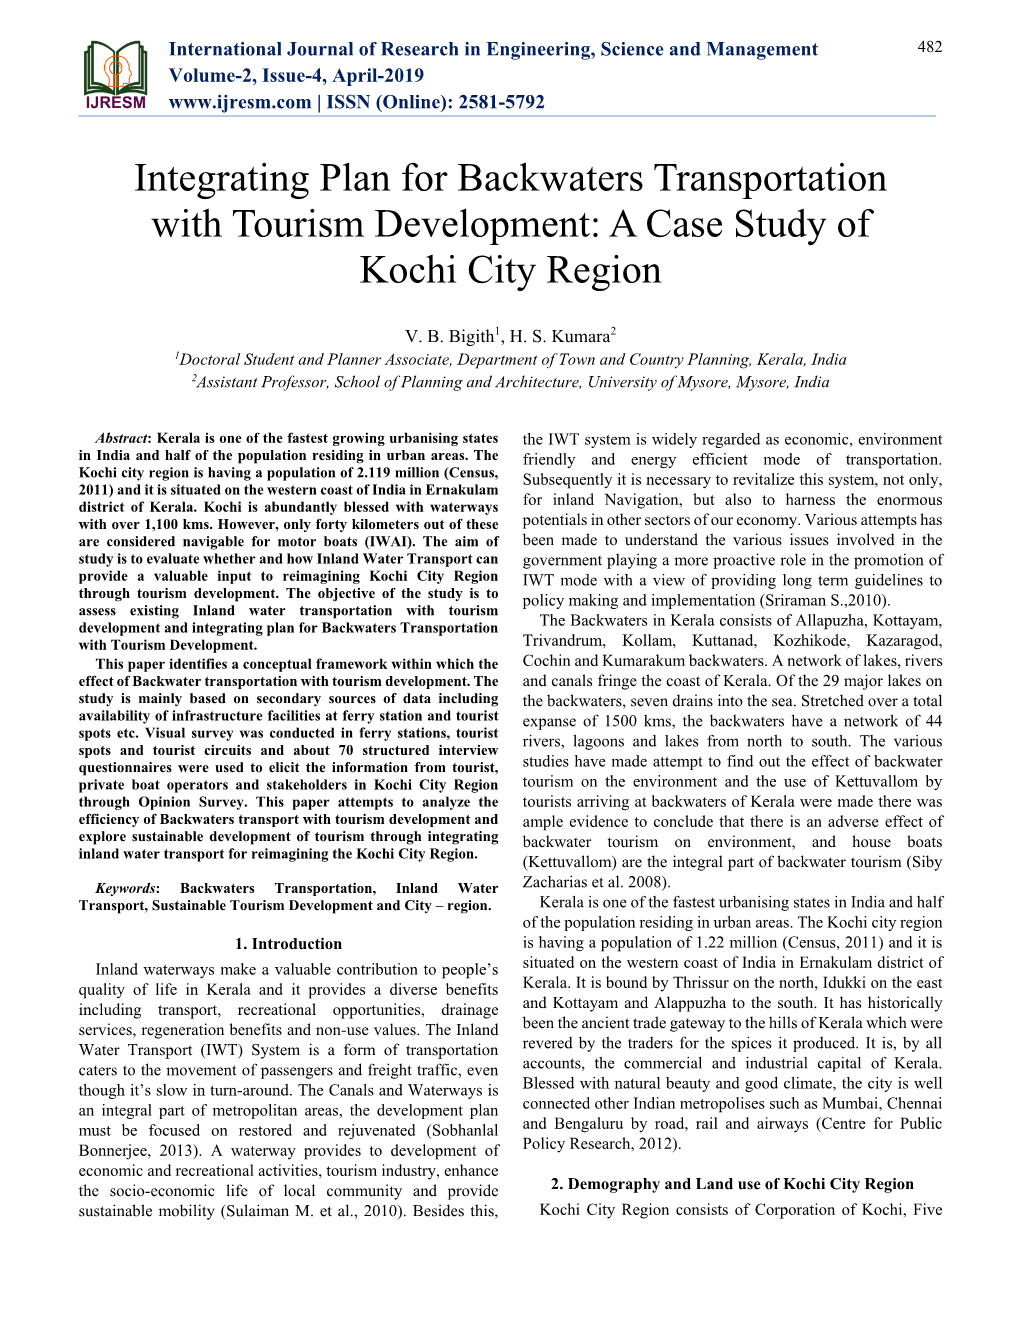 Integrating Plan for Backwaters Transportation with Tourism Development: a Case Study of Kochi City Region